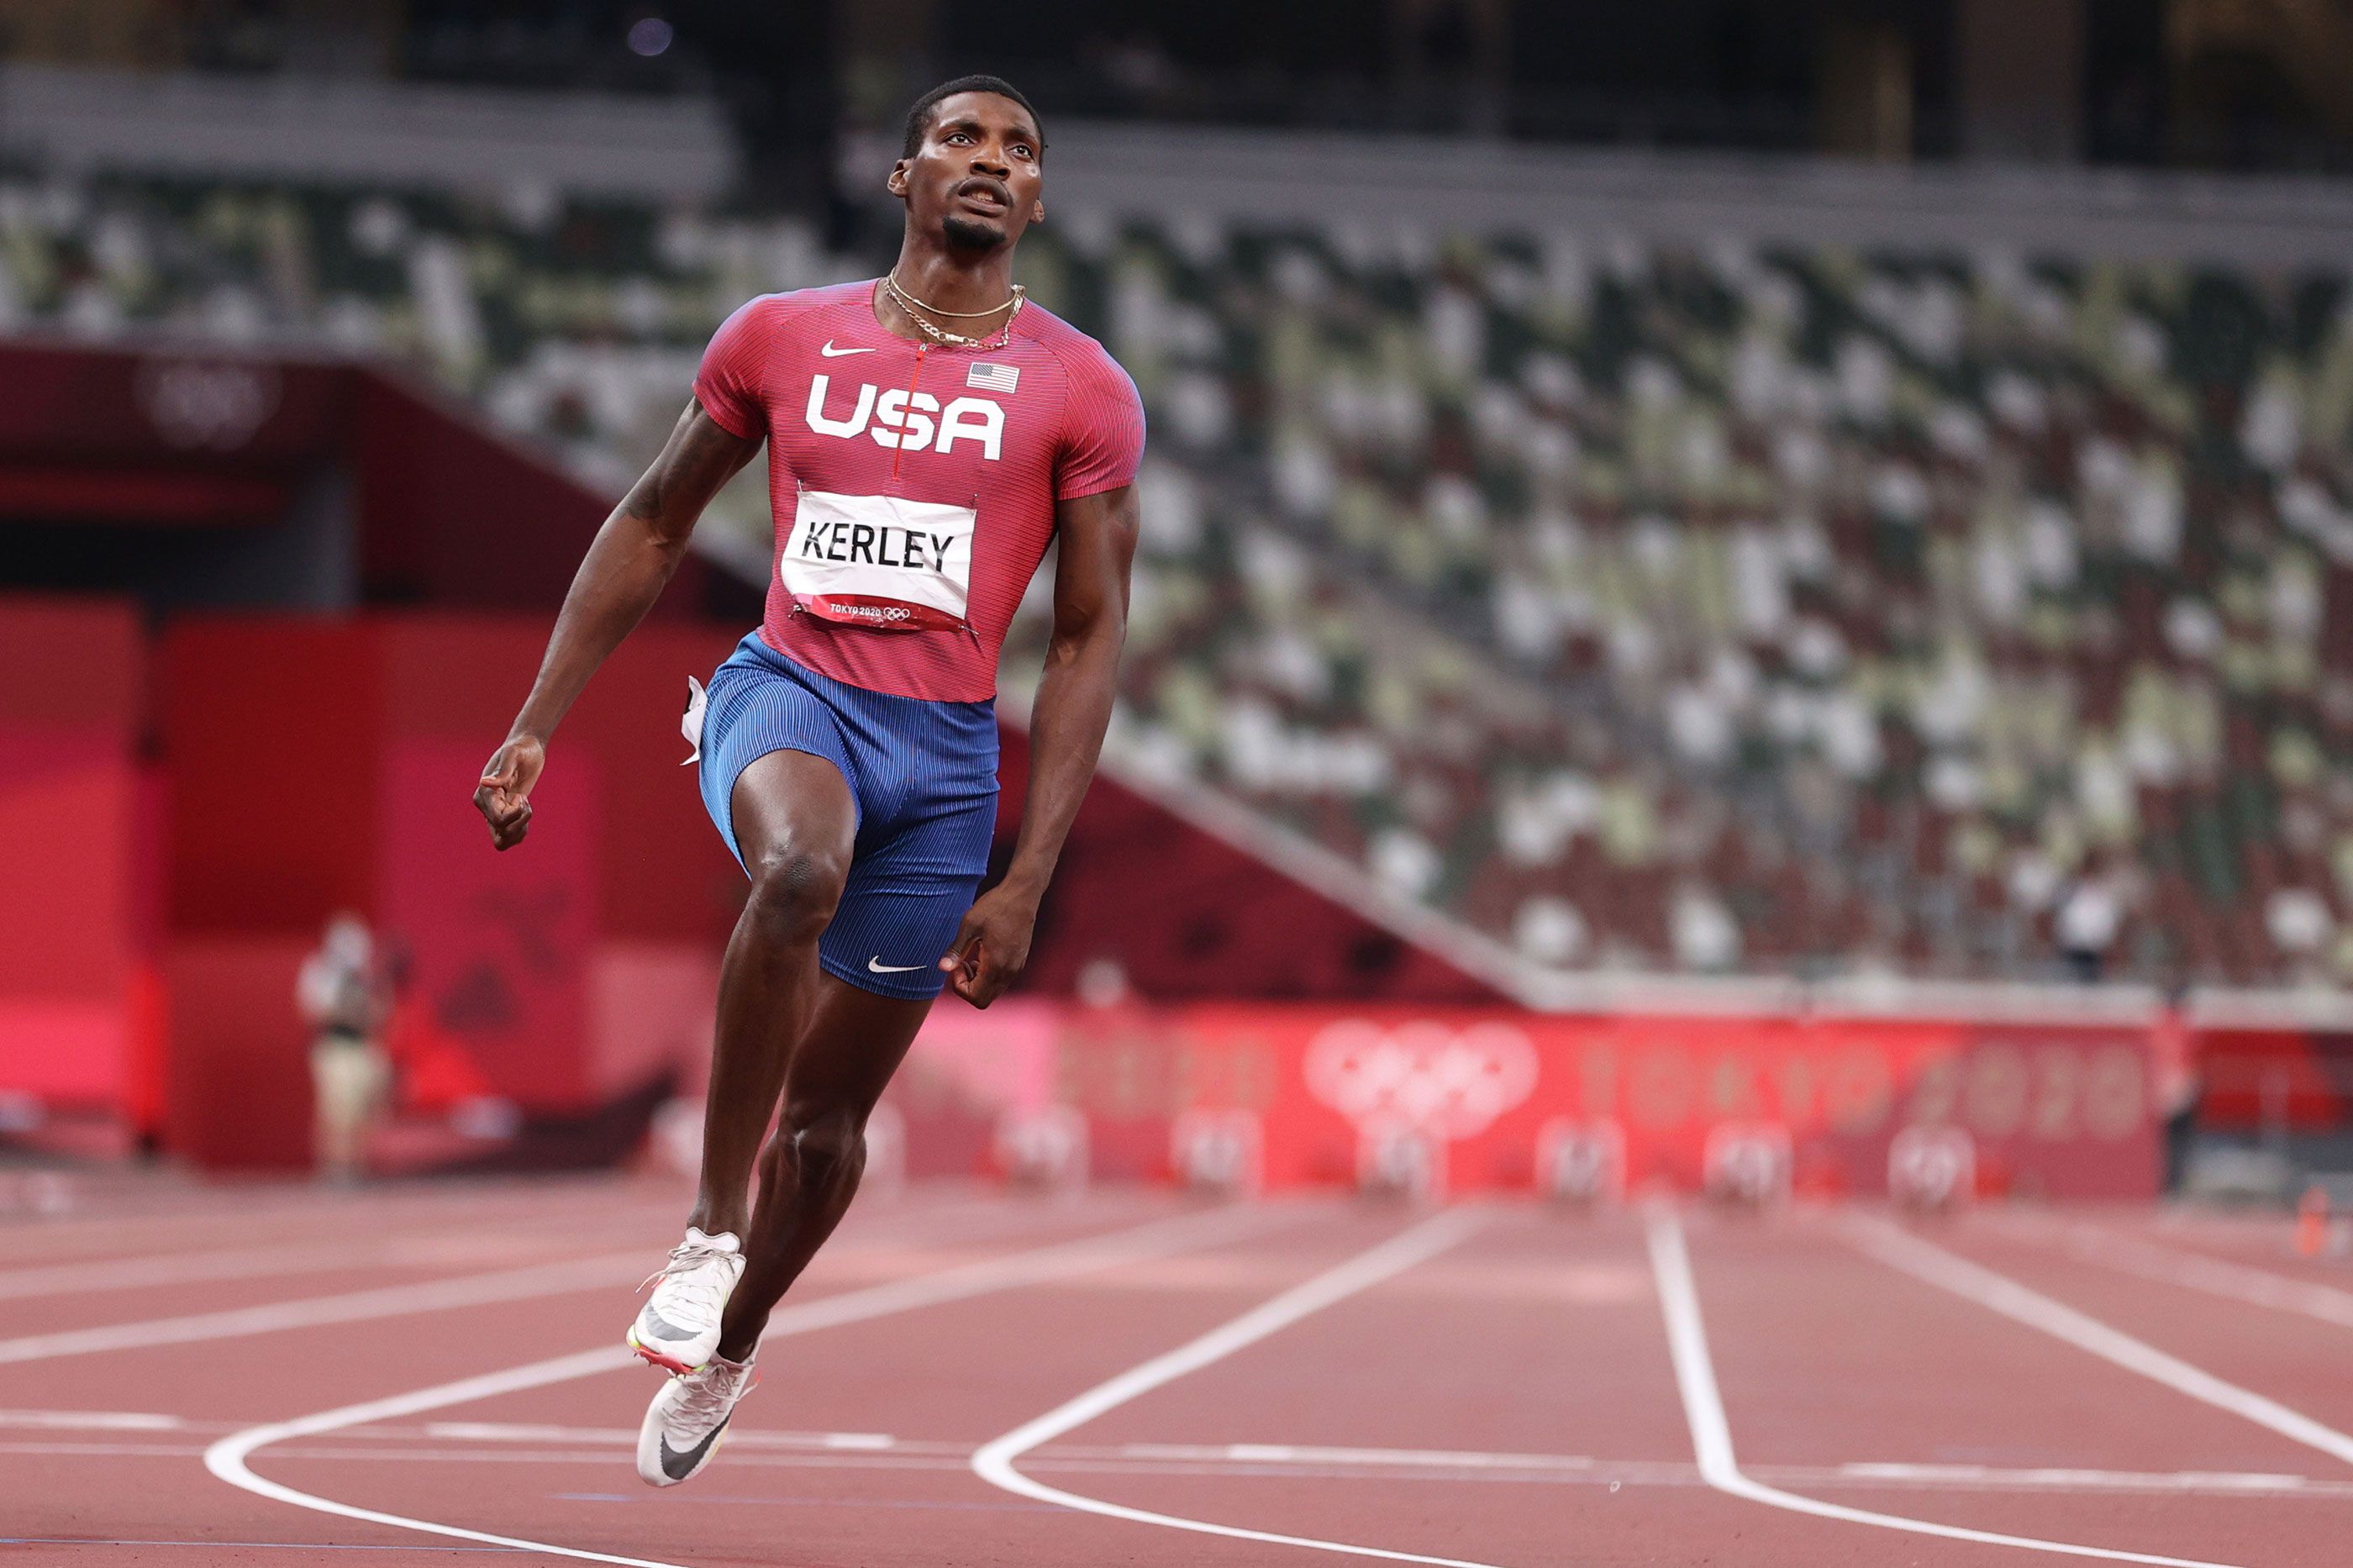 USA's Fred Kerley secures 100m silver at the Tokyo Olympic Games